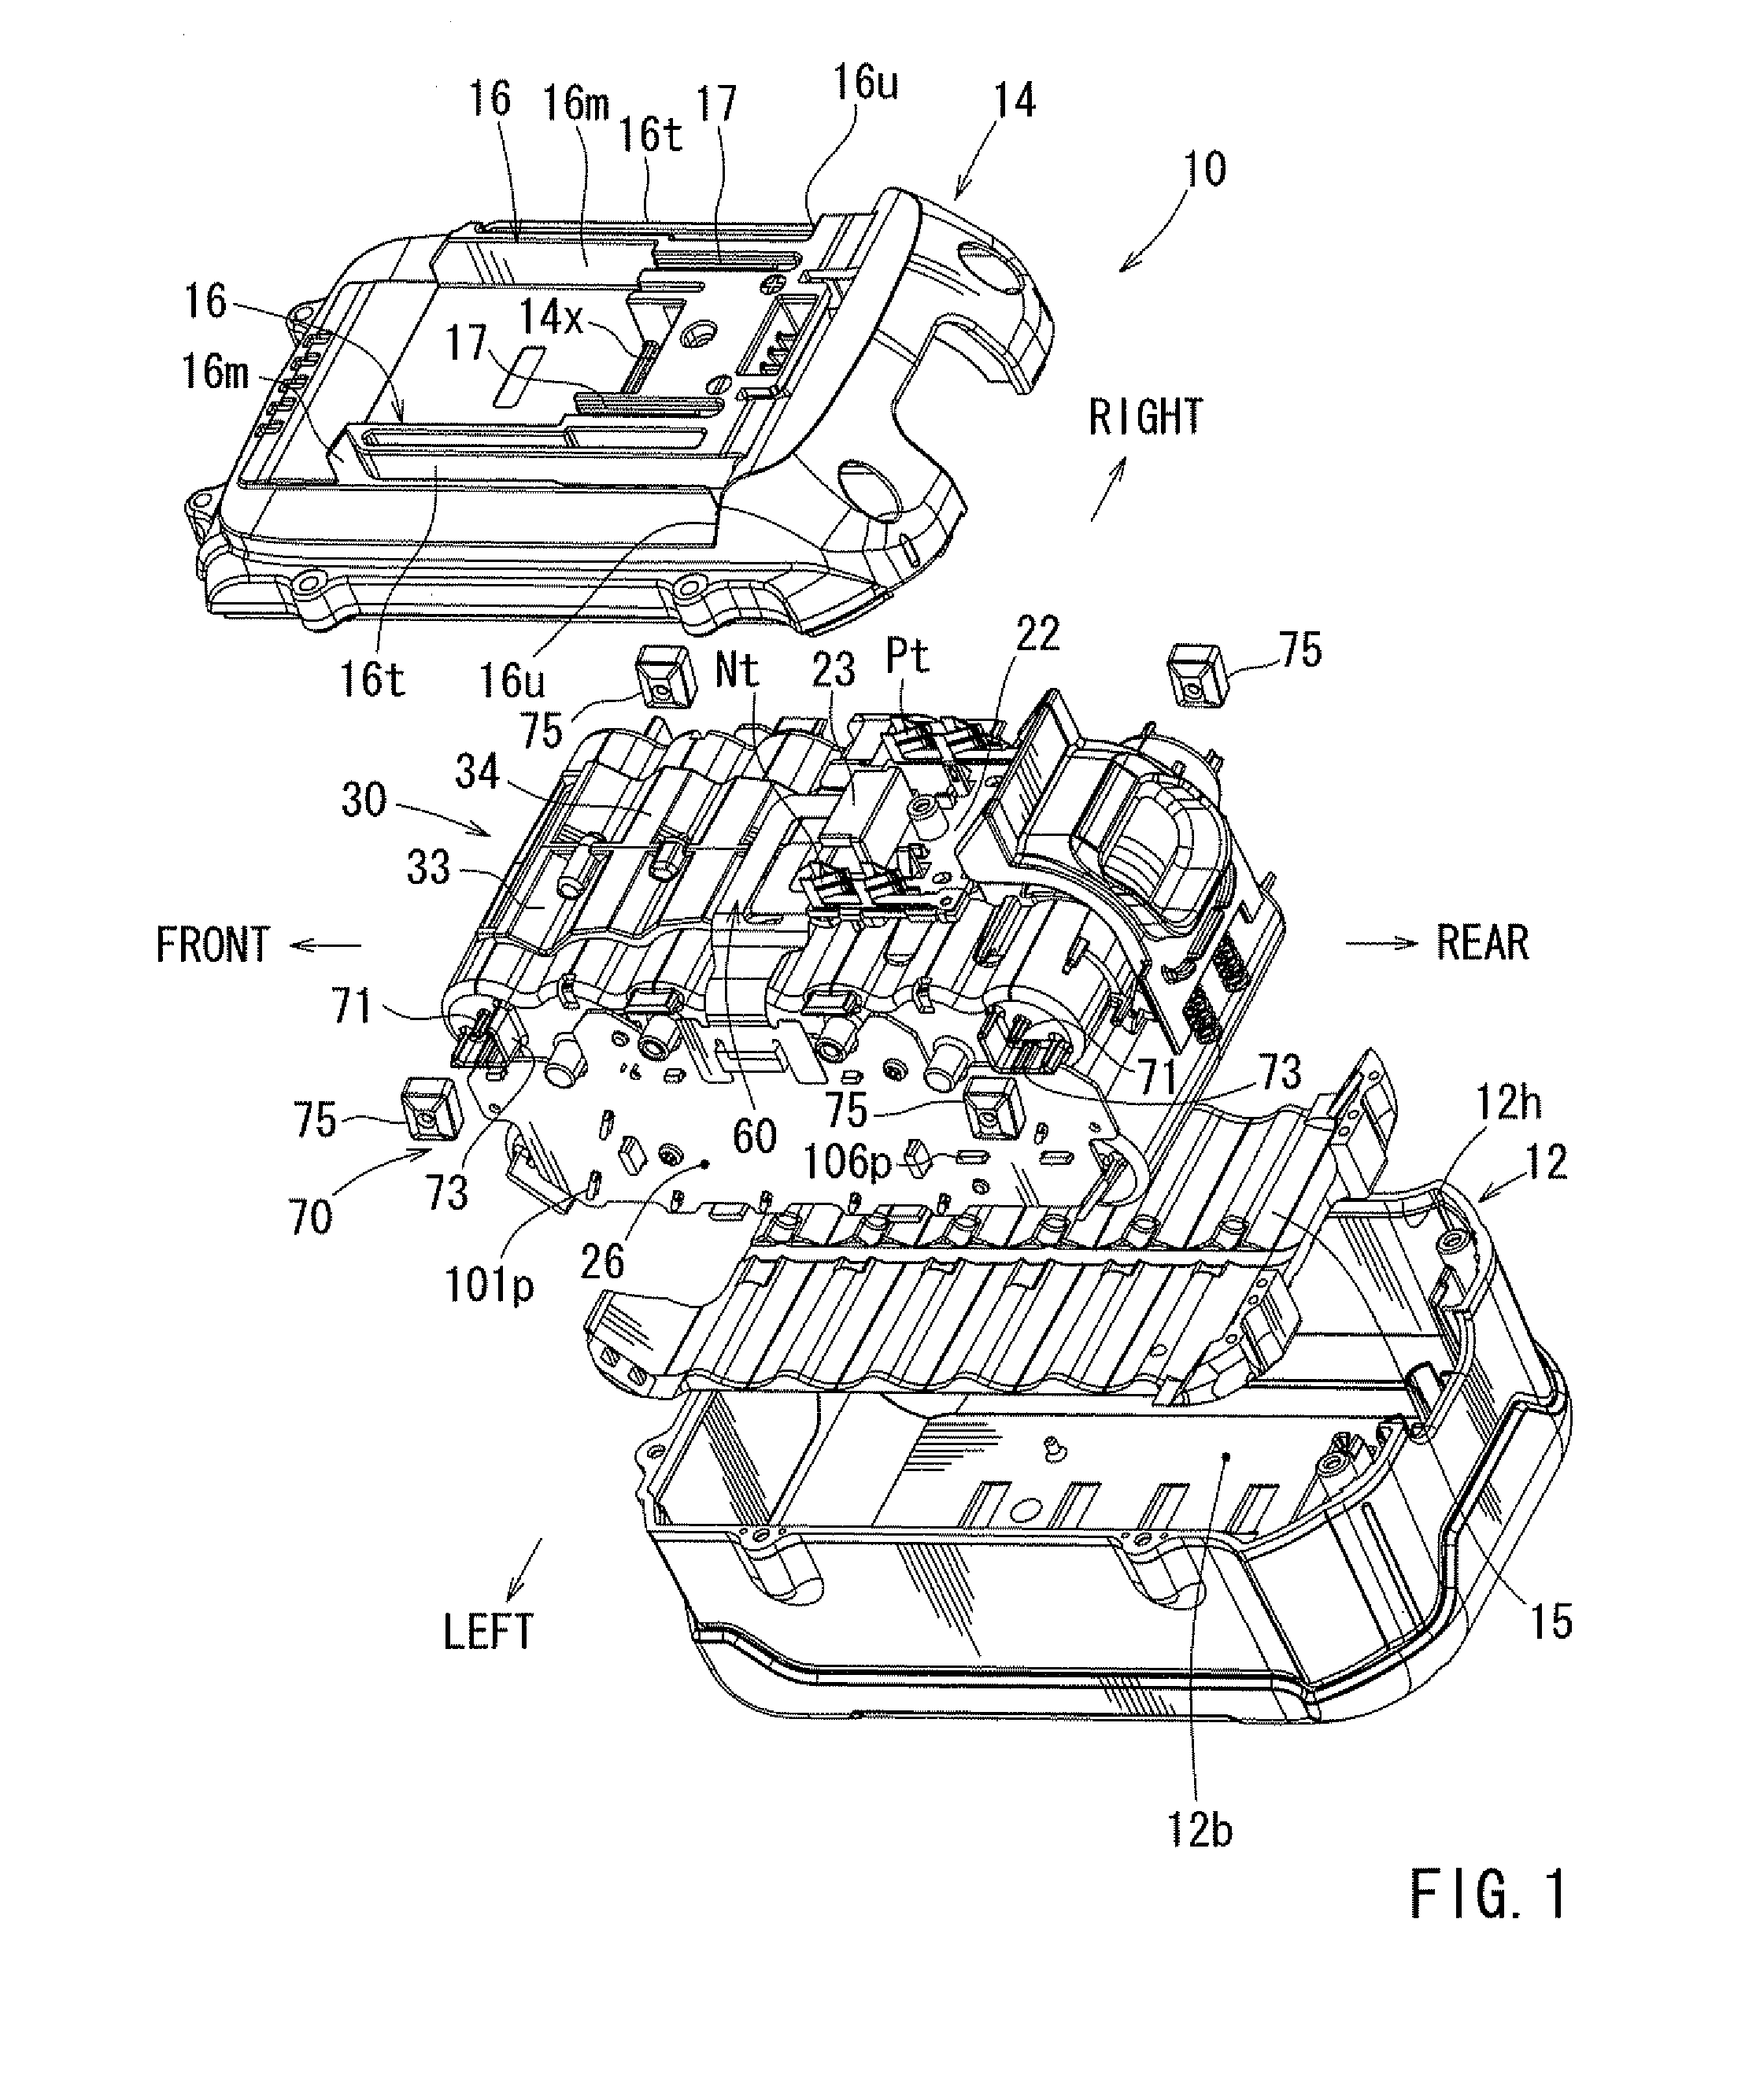 Battery pack including a shock absorbing device